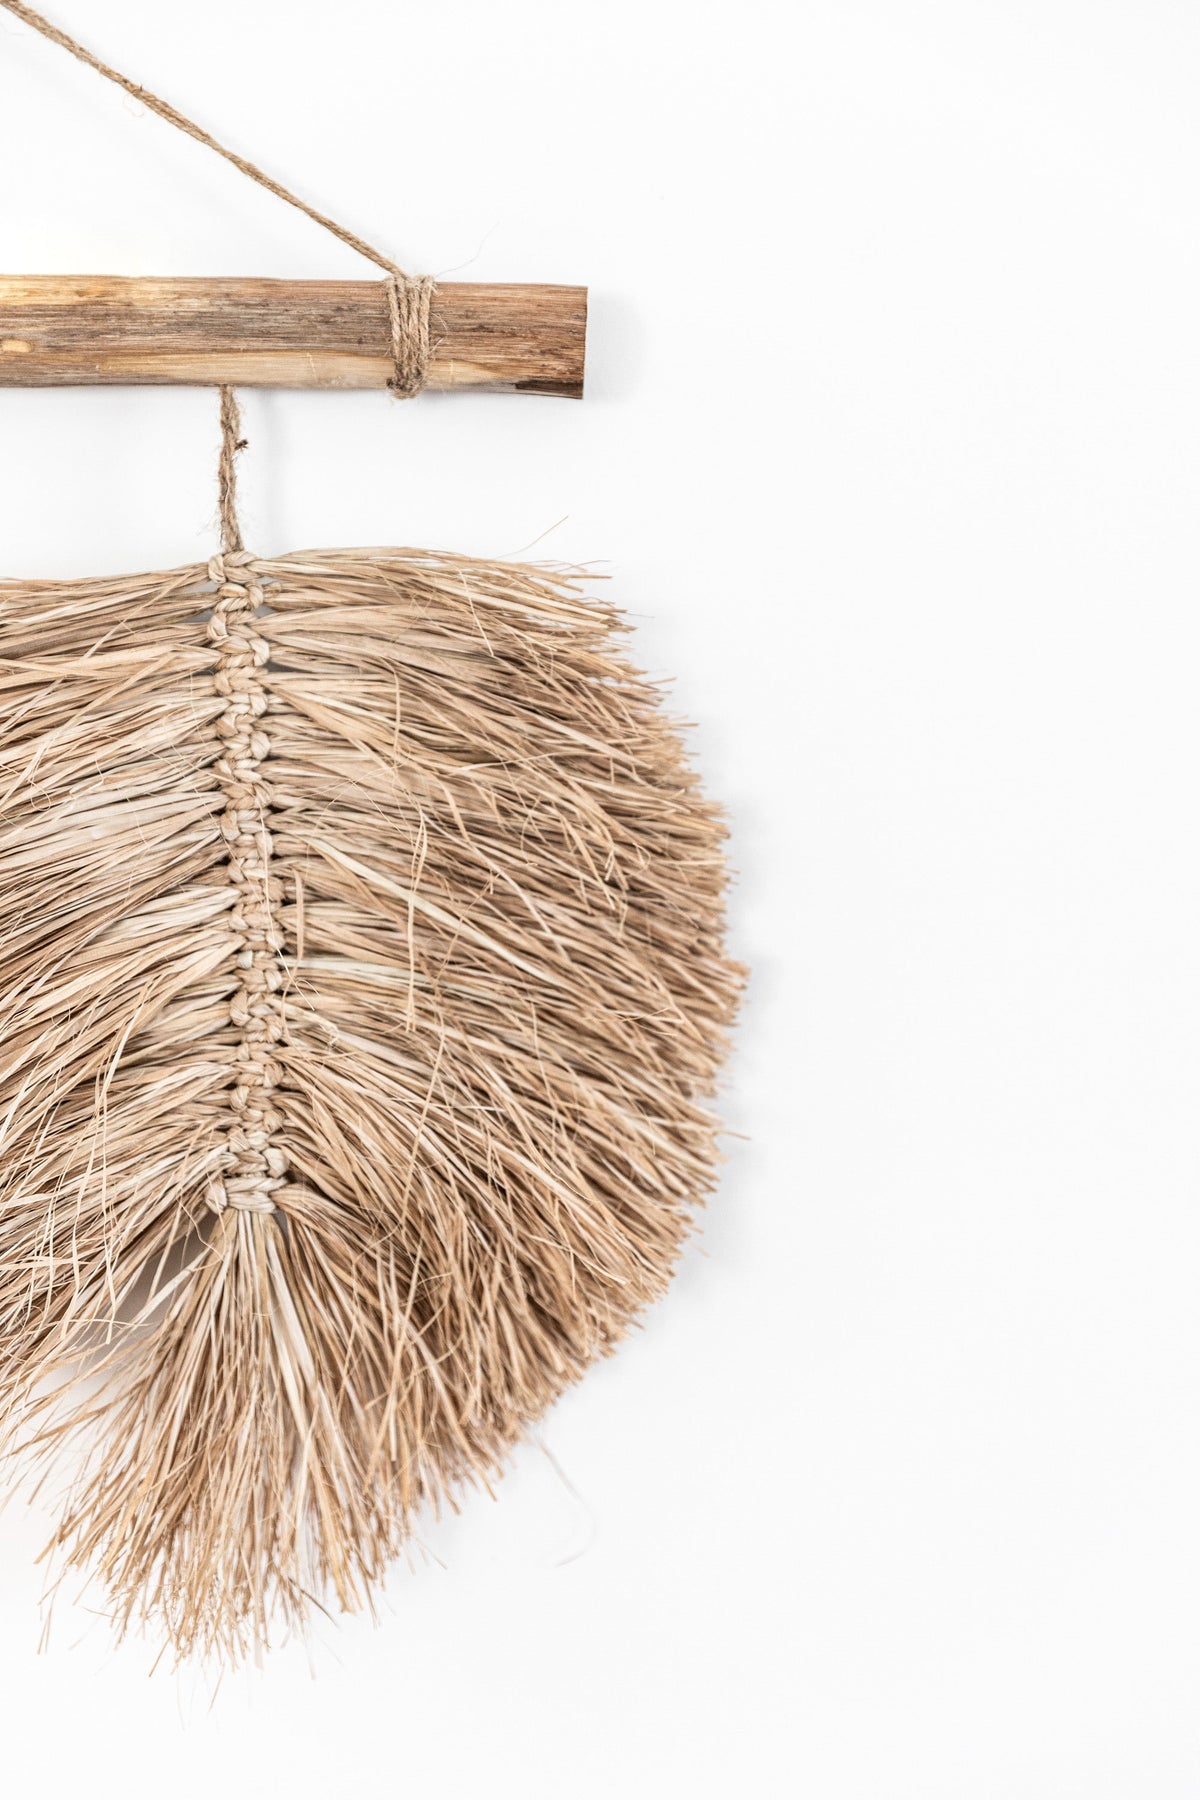 A trio of hand braided raffia leaves hang from a natural driftwood piece found by the coast & completed with a Jute hanger. This wall hanging is ideal for those who love raw texture & the feel of natural materials in their home.